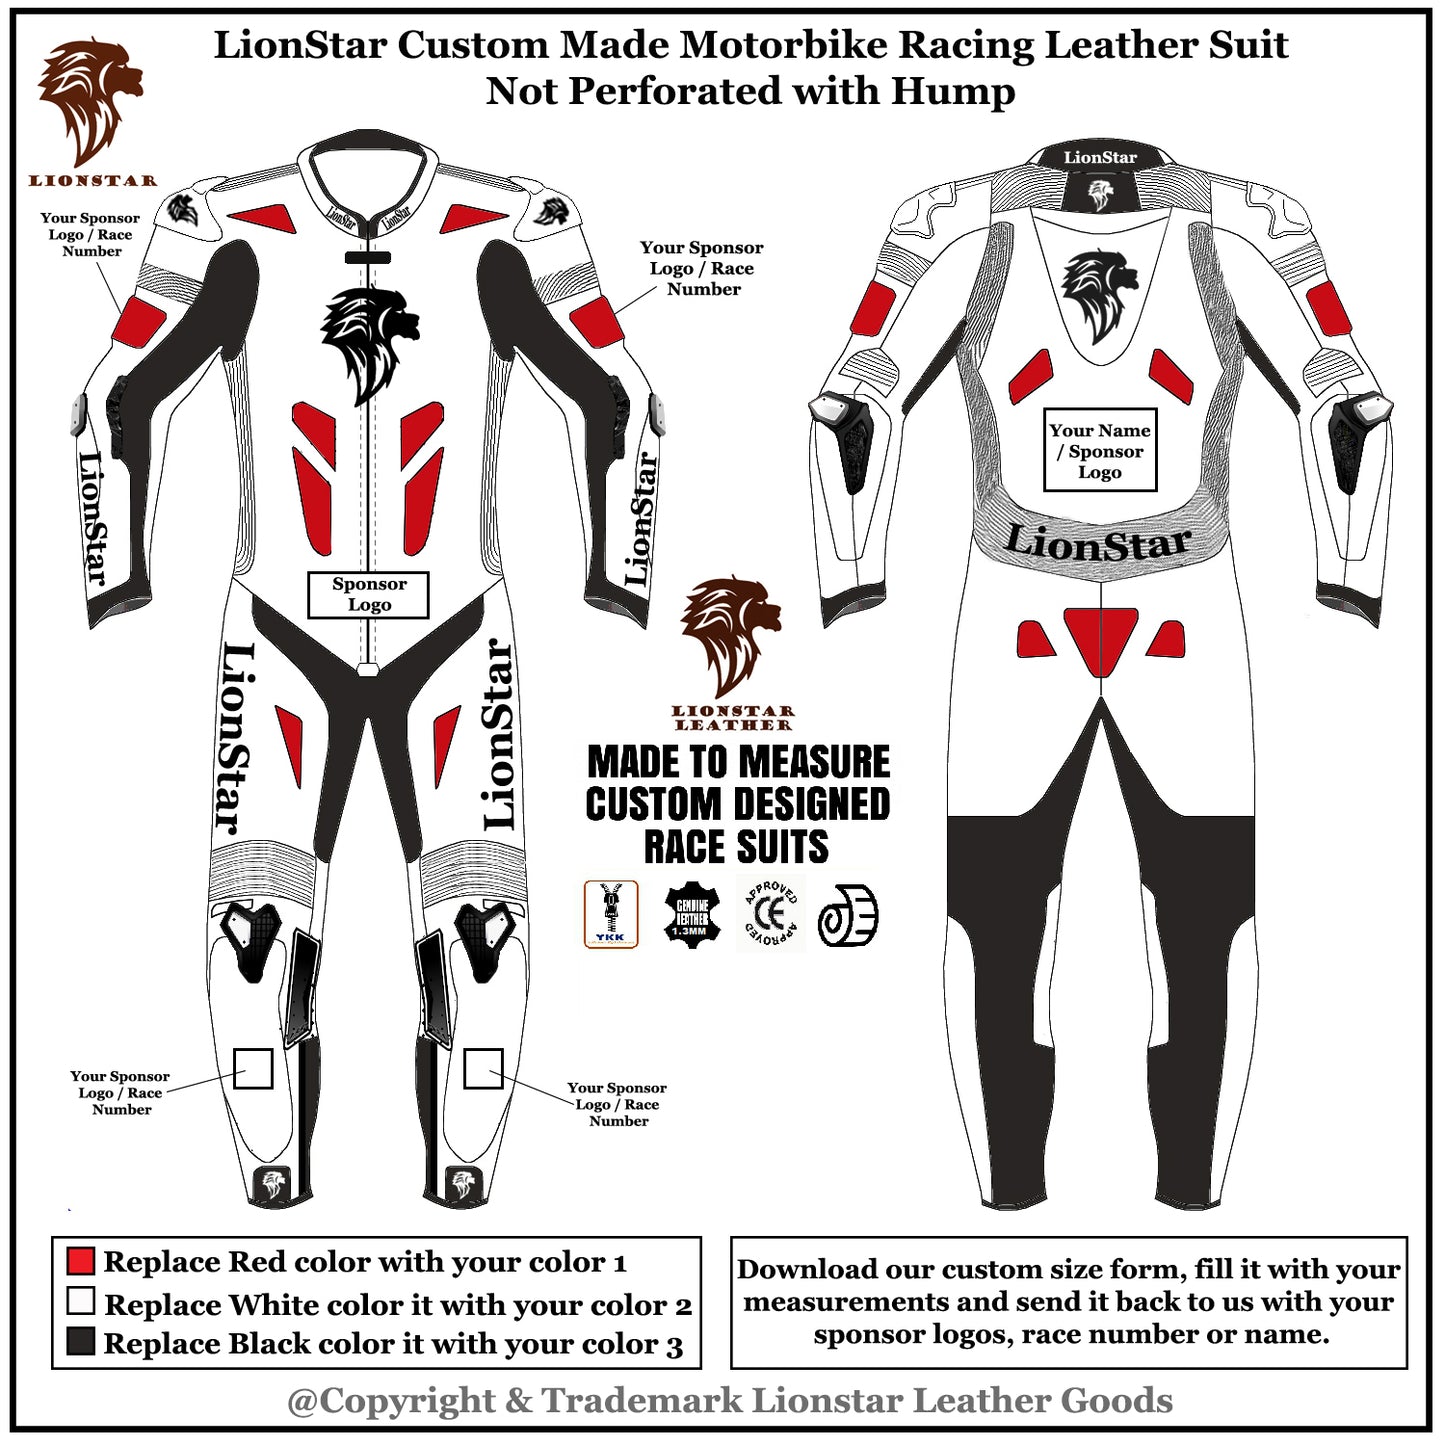 Custom Racing Suit with hump not perforated